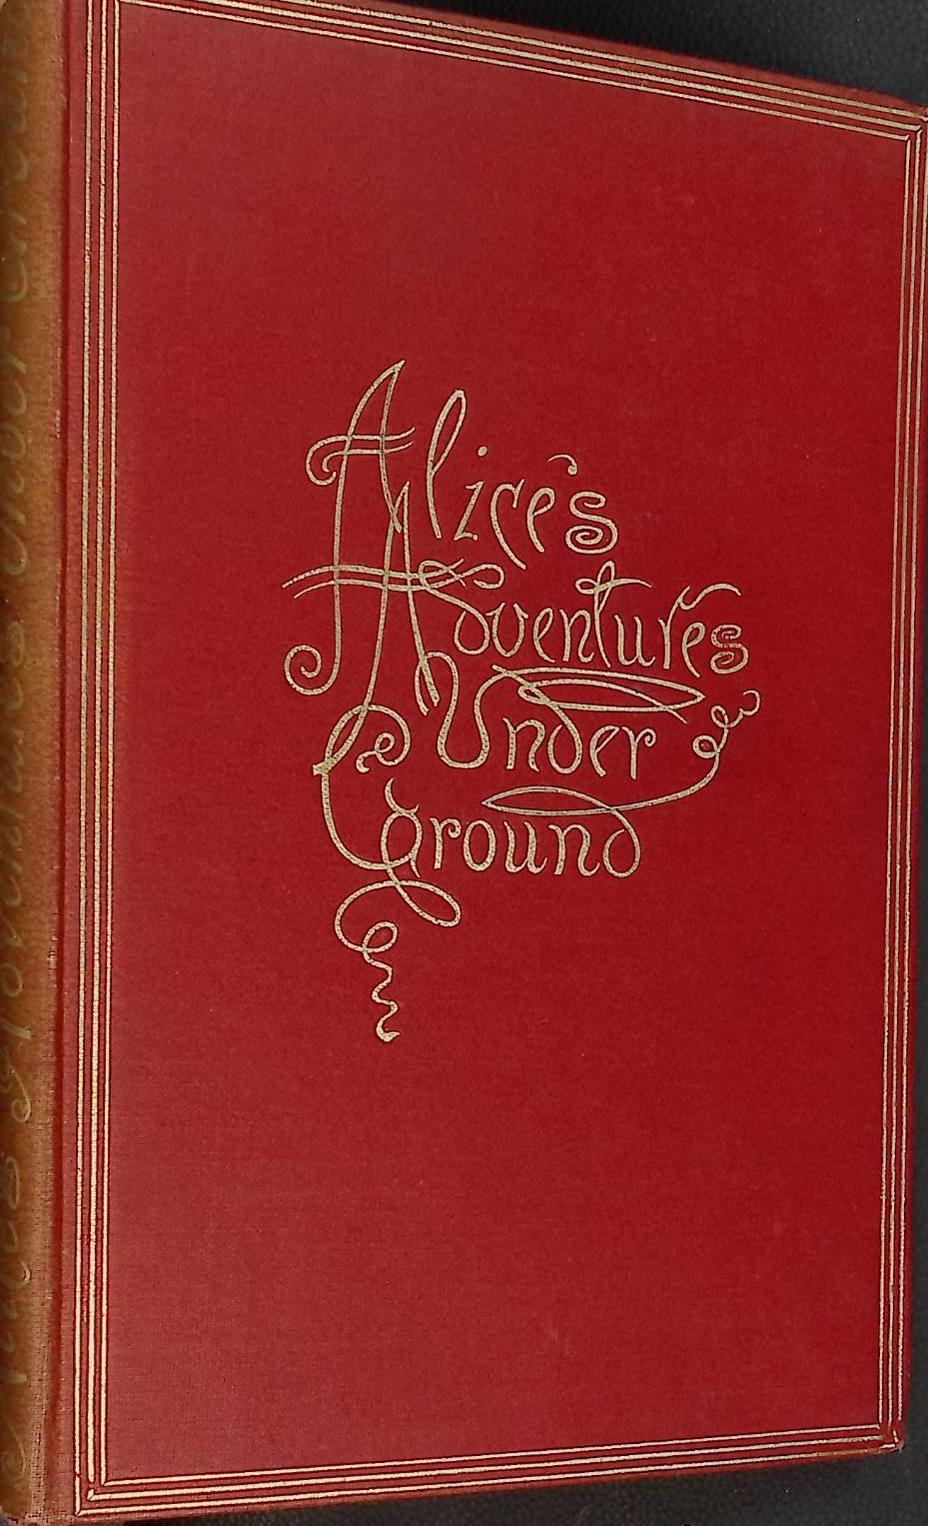 Alice's Adventures Under Ground [Underground]. Being a Facsimile of the Original MS. Book and Afterwards Developed into "Alice's Adventures in Wonderland".